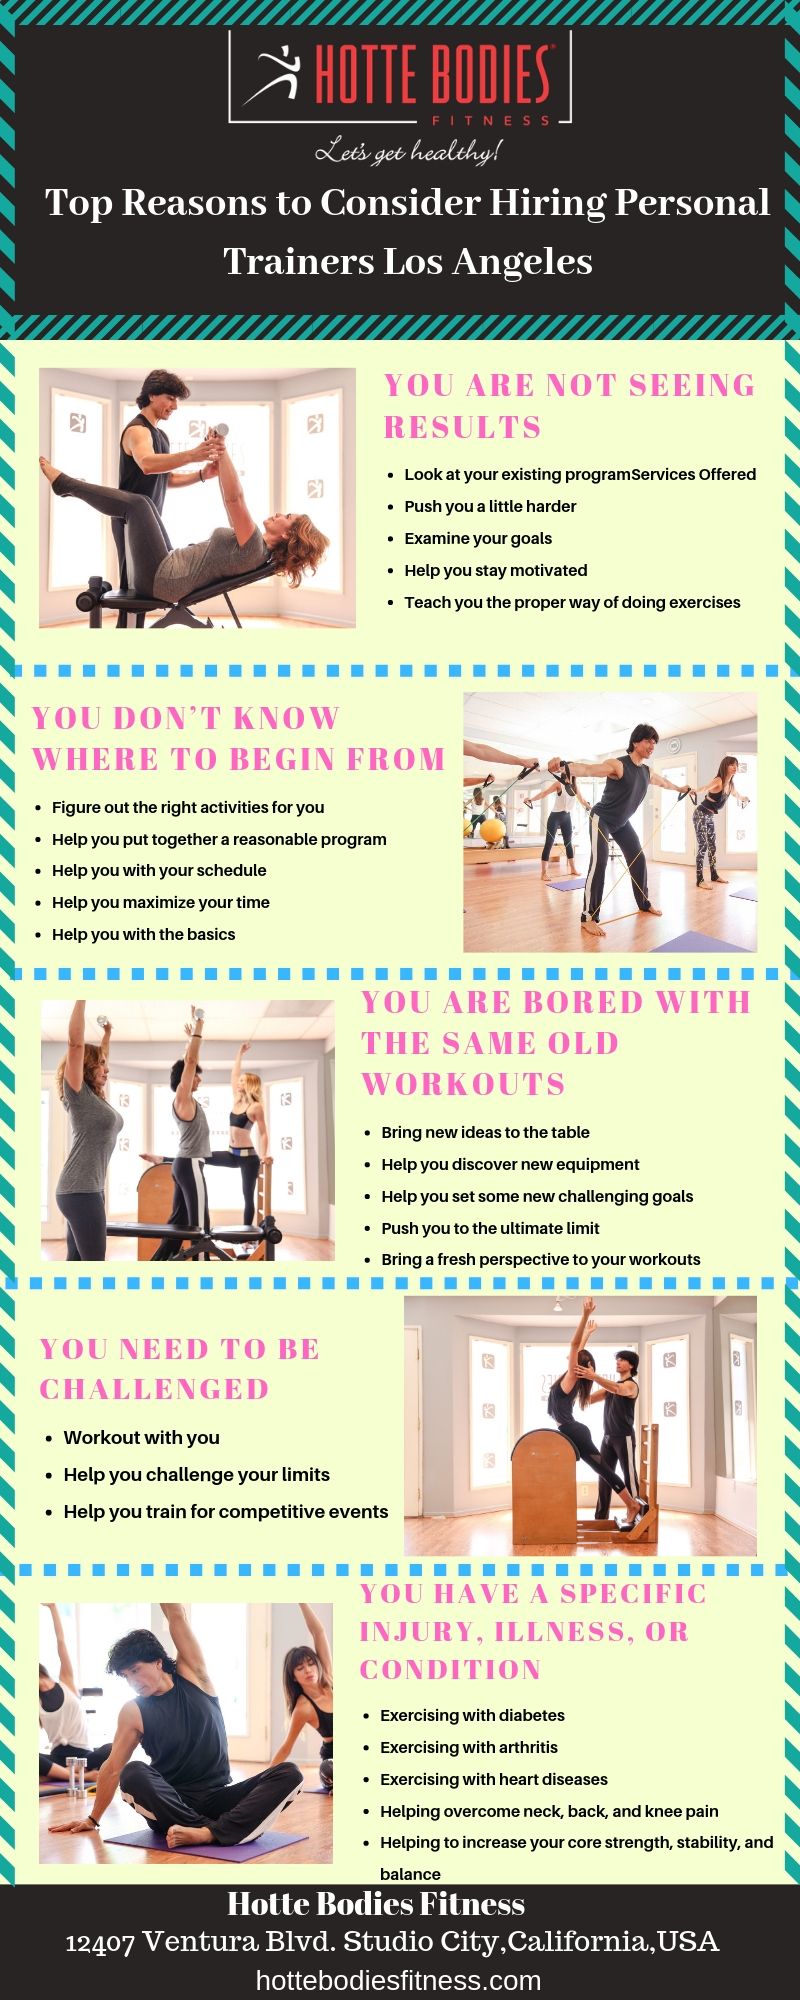 Top Reasons to Consider Hiring Personal Trainers Los Angeles.jpg  by HotteBodiesFitness